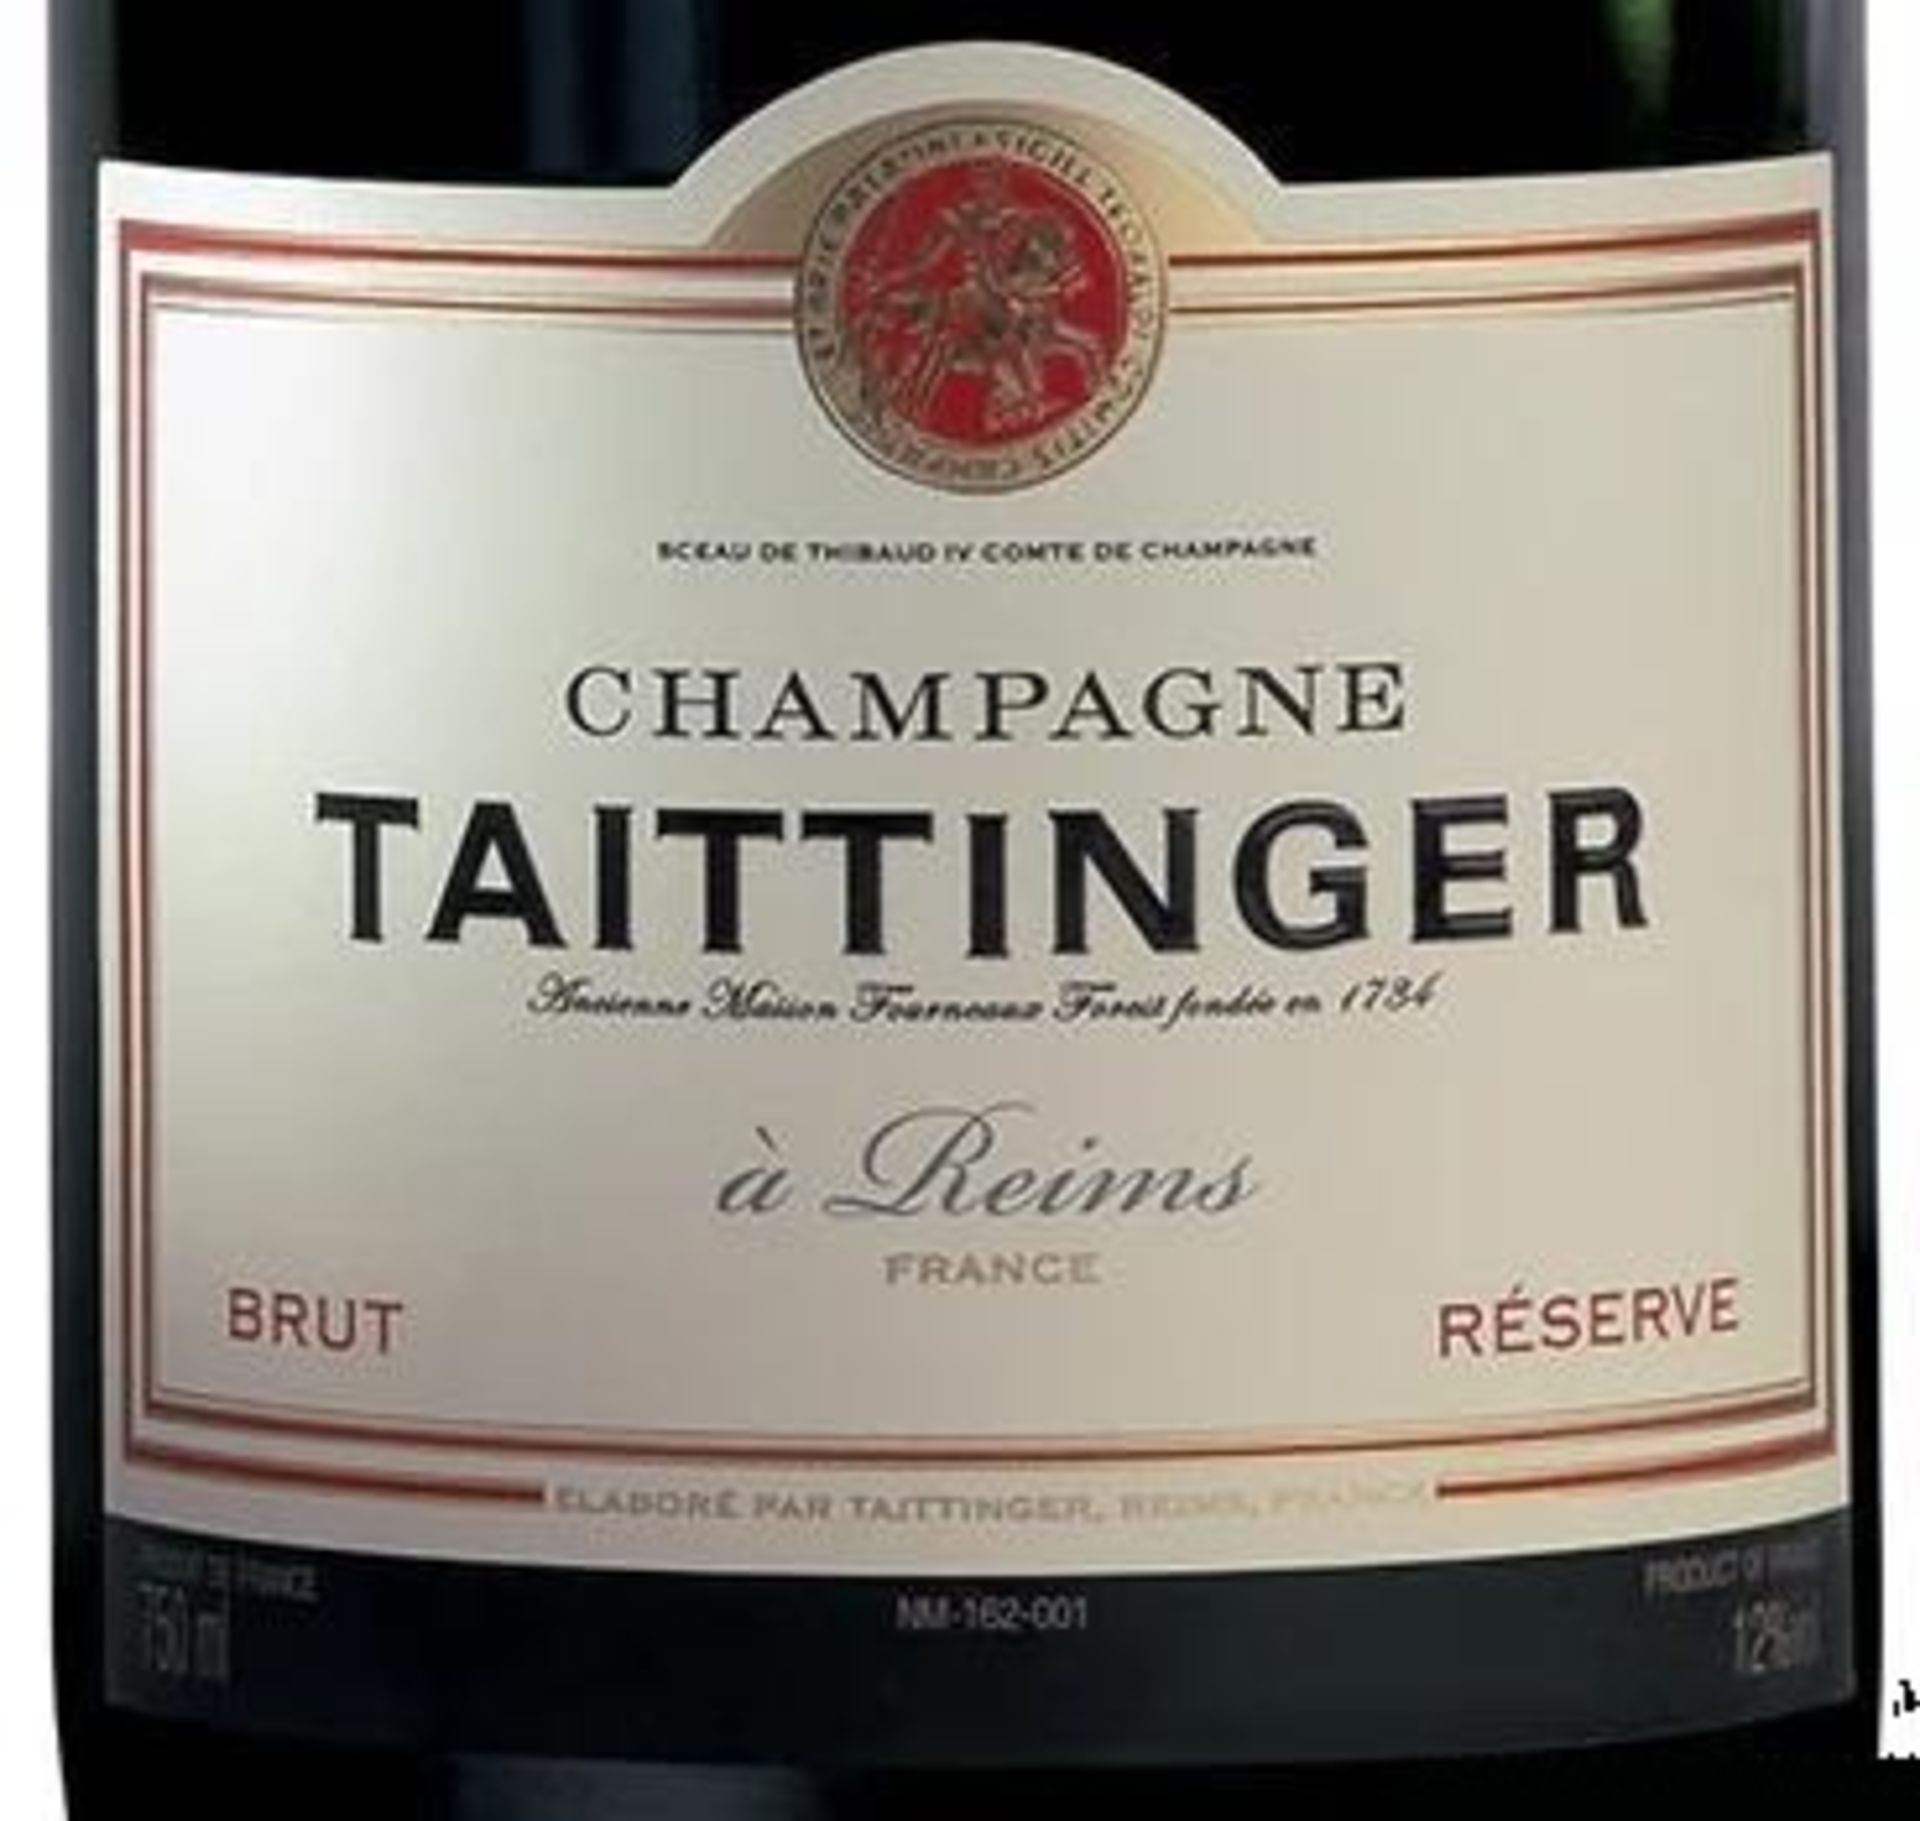 Taittinger Brut Reserve Champagne, NV 75cl ( Bid Is For 1x Bottle Option To Purchase More)